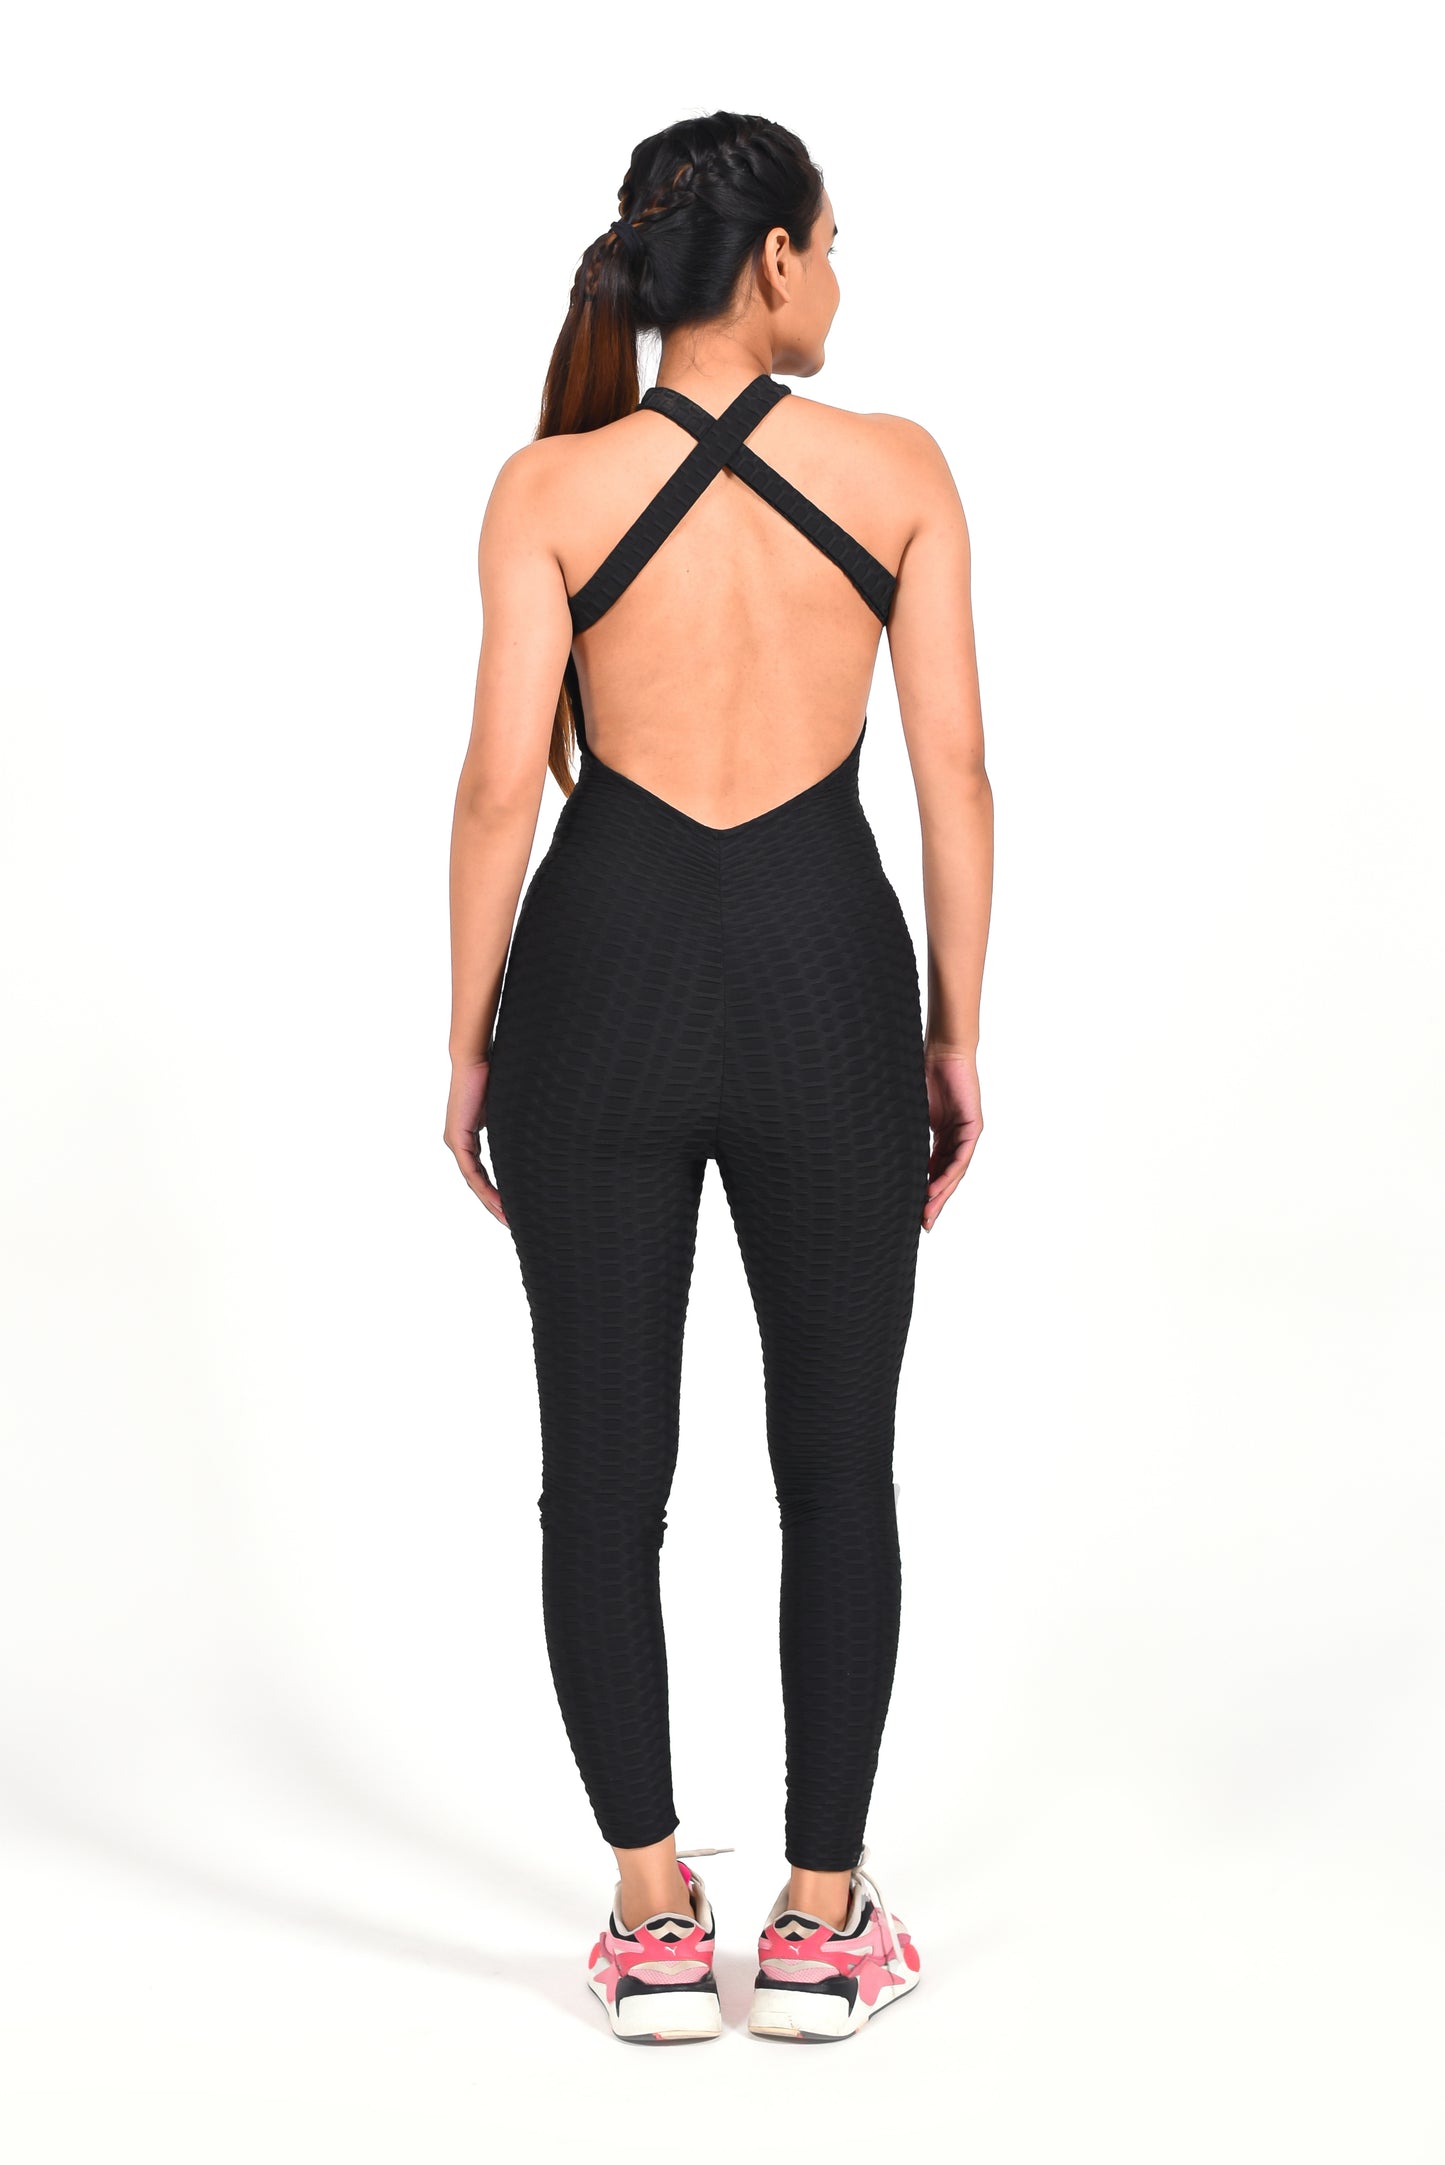 Women Fitness Overalls Sportswear Sports Jumpsuit Tracksuits Gym